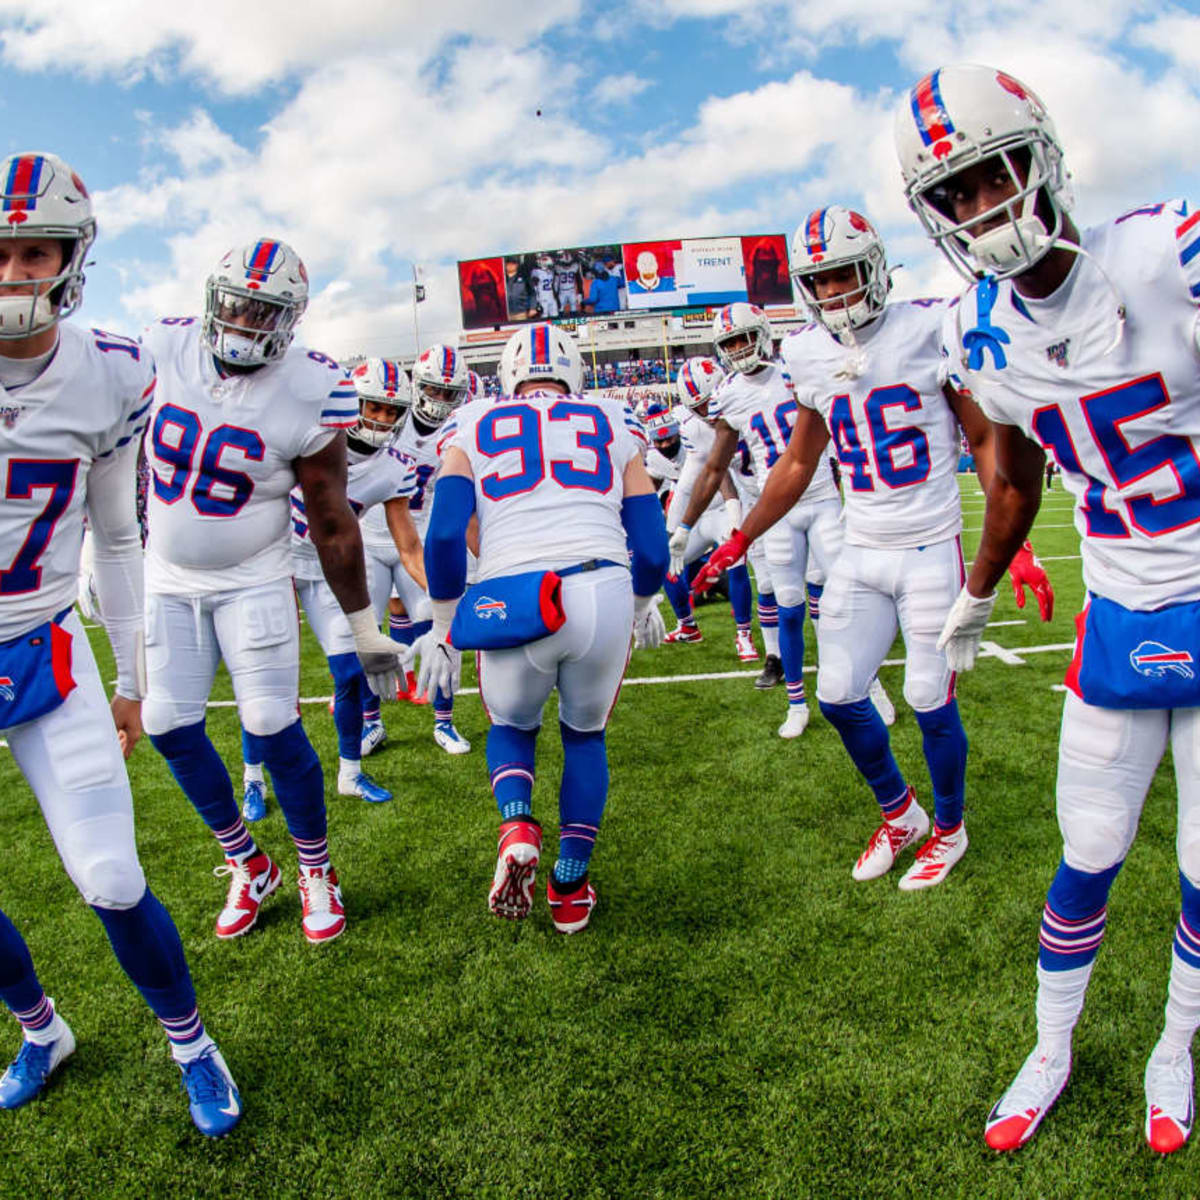 Why Continuity Will Carry The Buffalo Bills - Visit NFL Draft on Sports Illustrated, latest news coverage, with rankings for NFL Draft prospects, College Football, Dynasty and Fantasy Football.